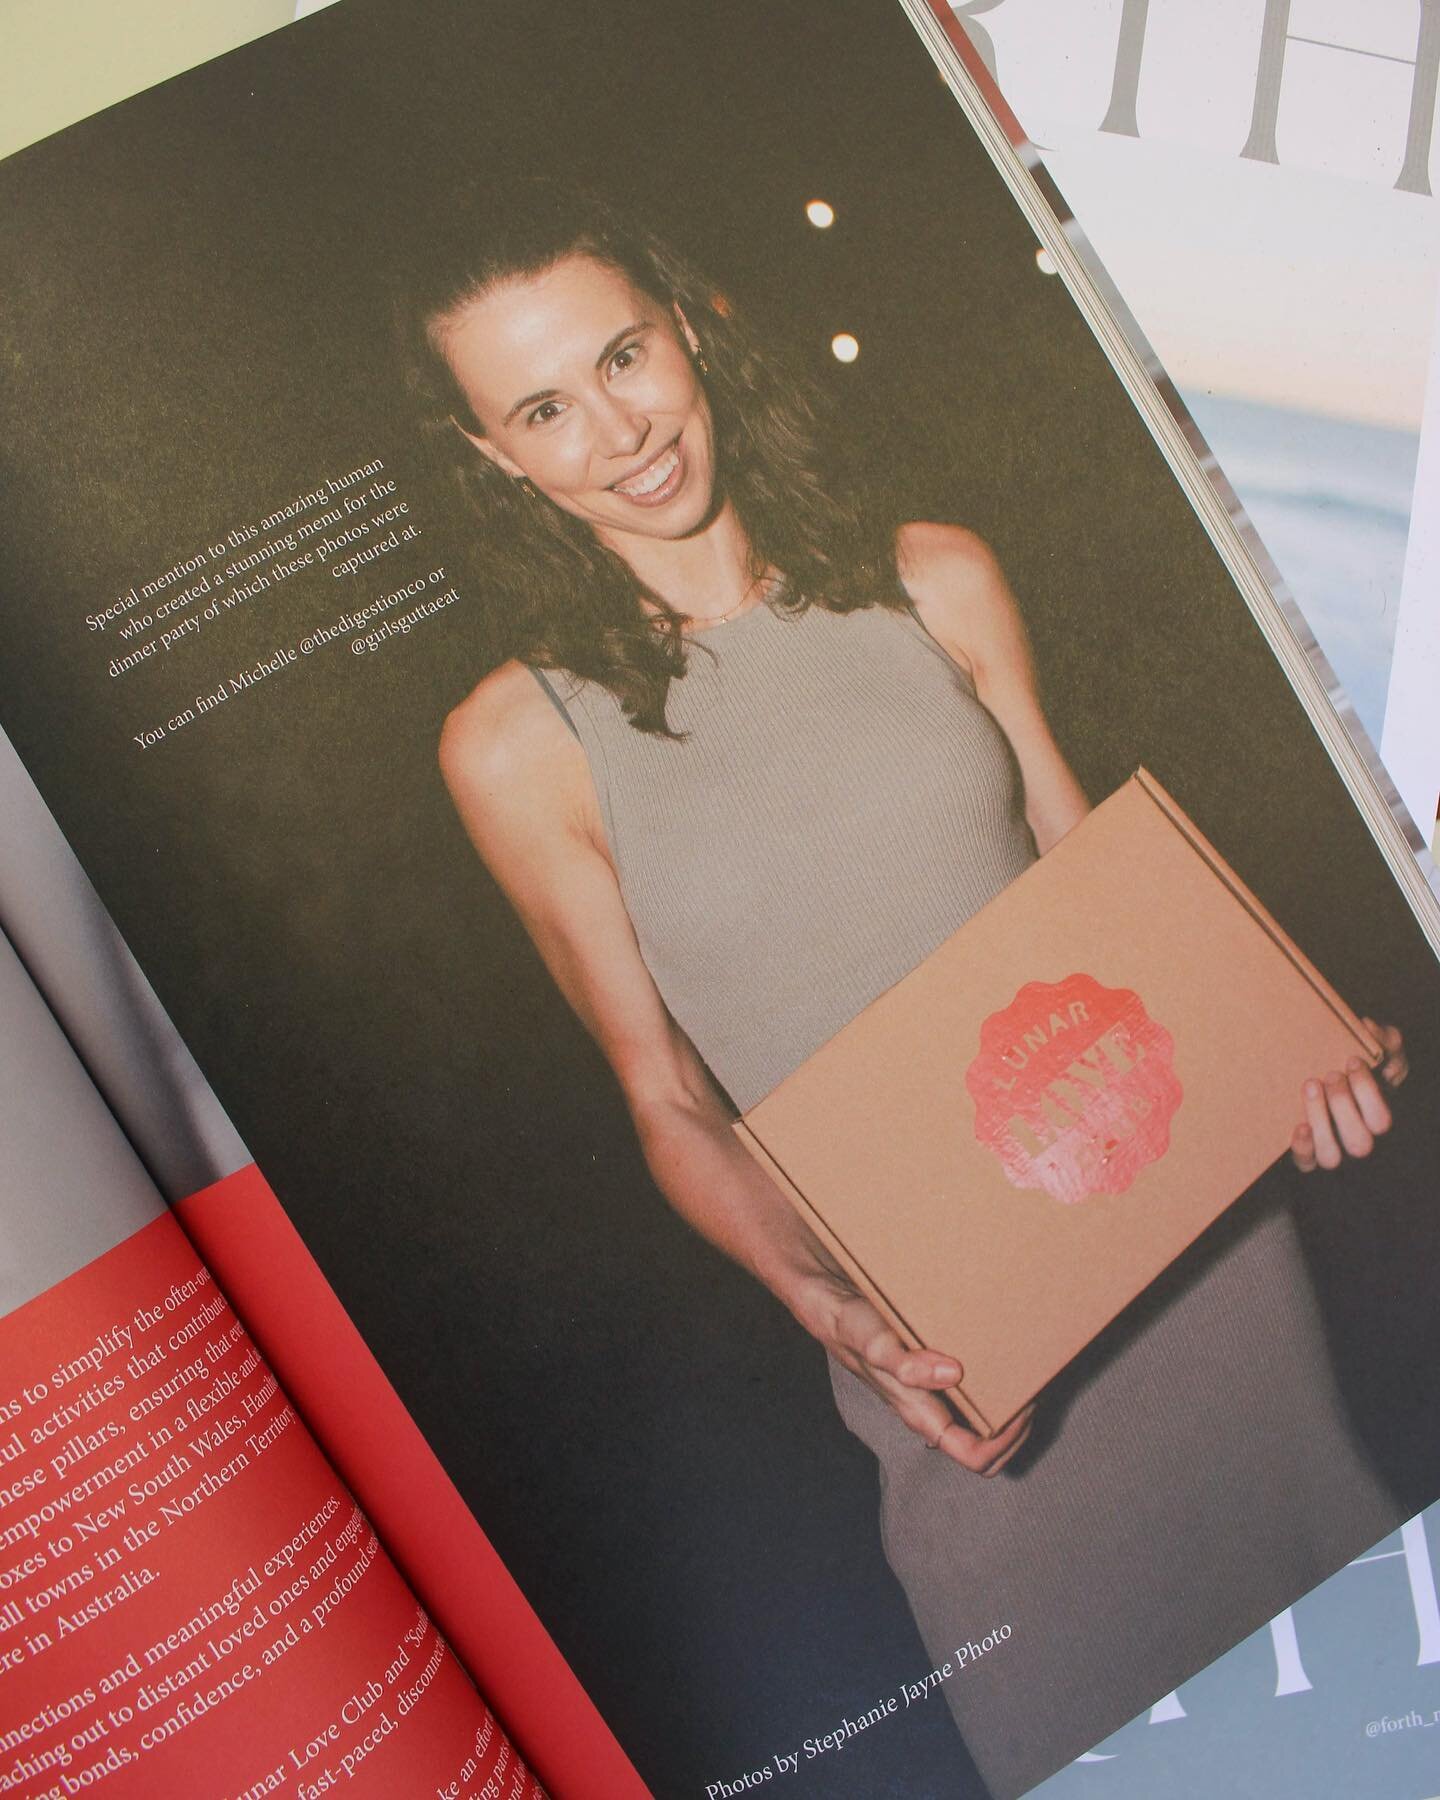 ⁣SPOTTED 📸 Michelle featured in this edition of @forth_mind 🗞️⠀
⠀
This article celebrates our partner @lunarloveclub which TDC had the pleasure of designing a gut nourishing dinner party menu for.⠀
⠀
Thank you so much @forth_mind and @lunarloveclub